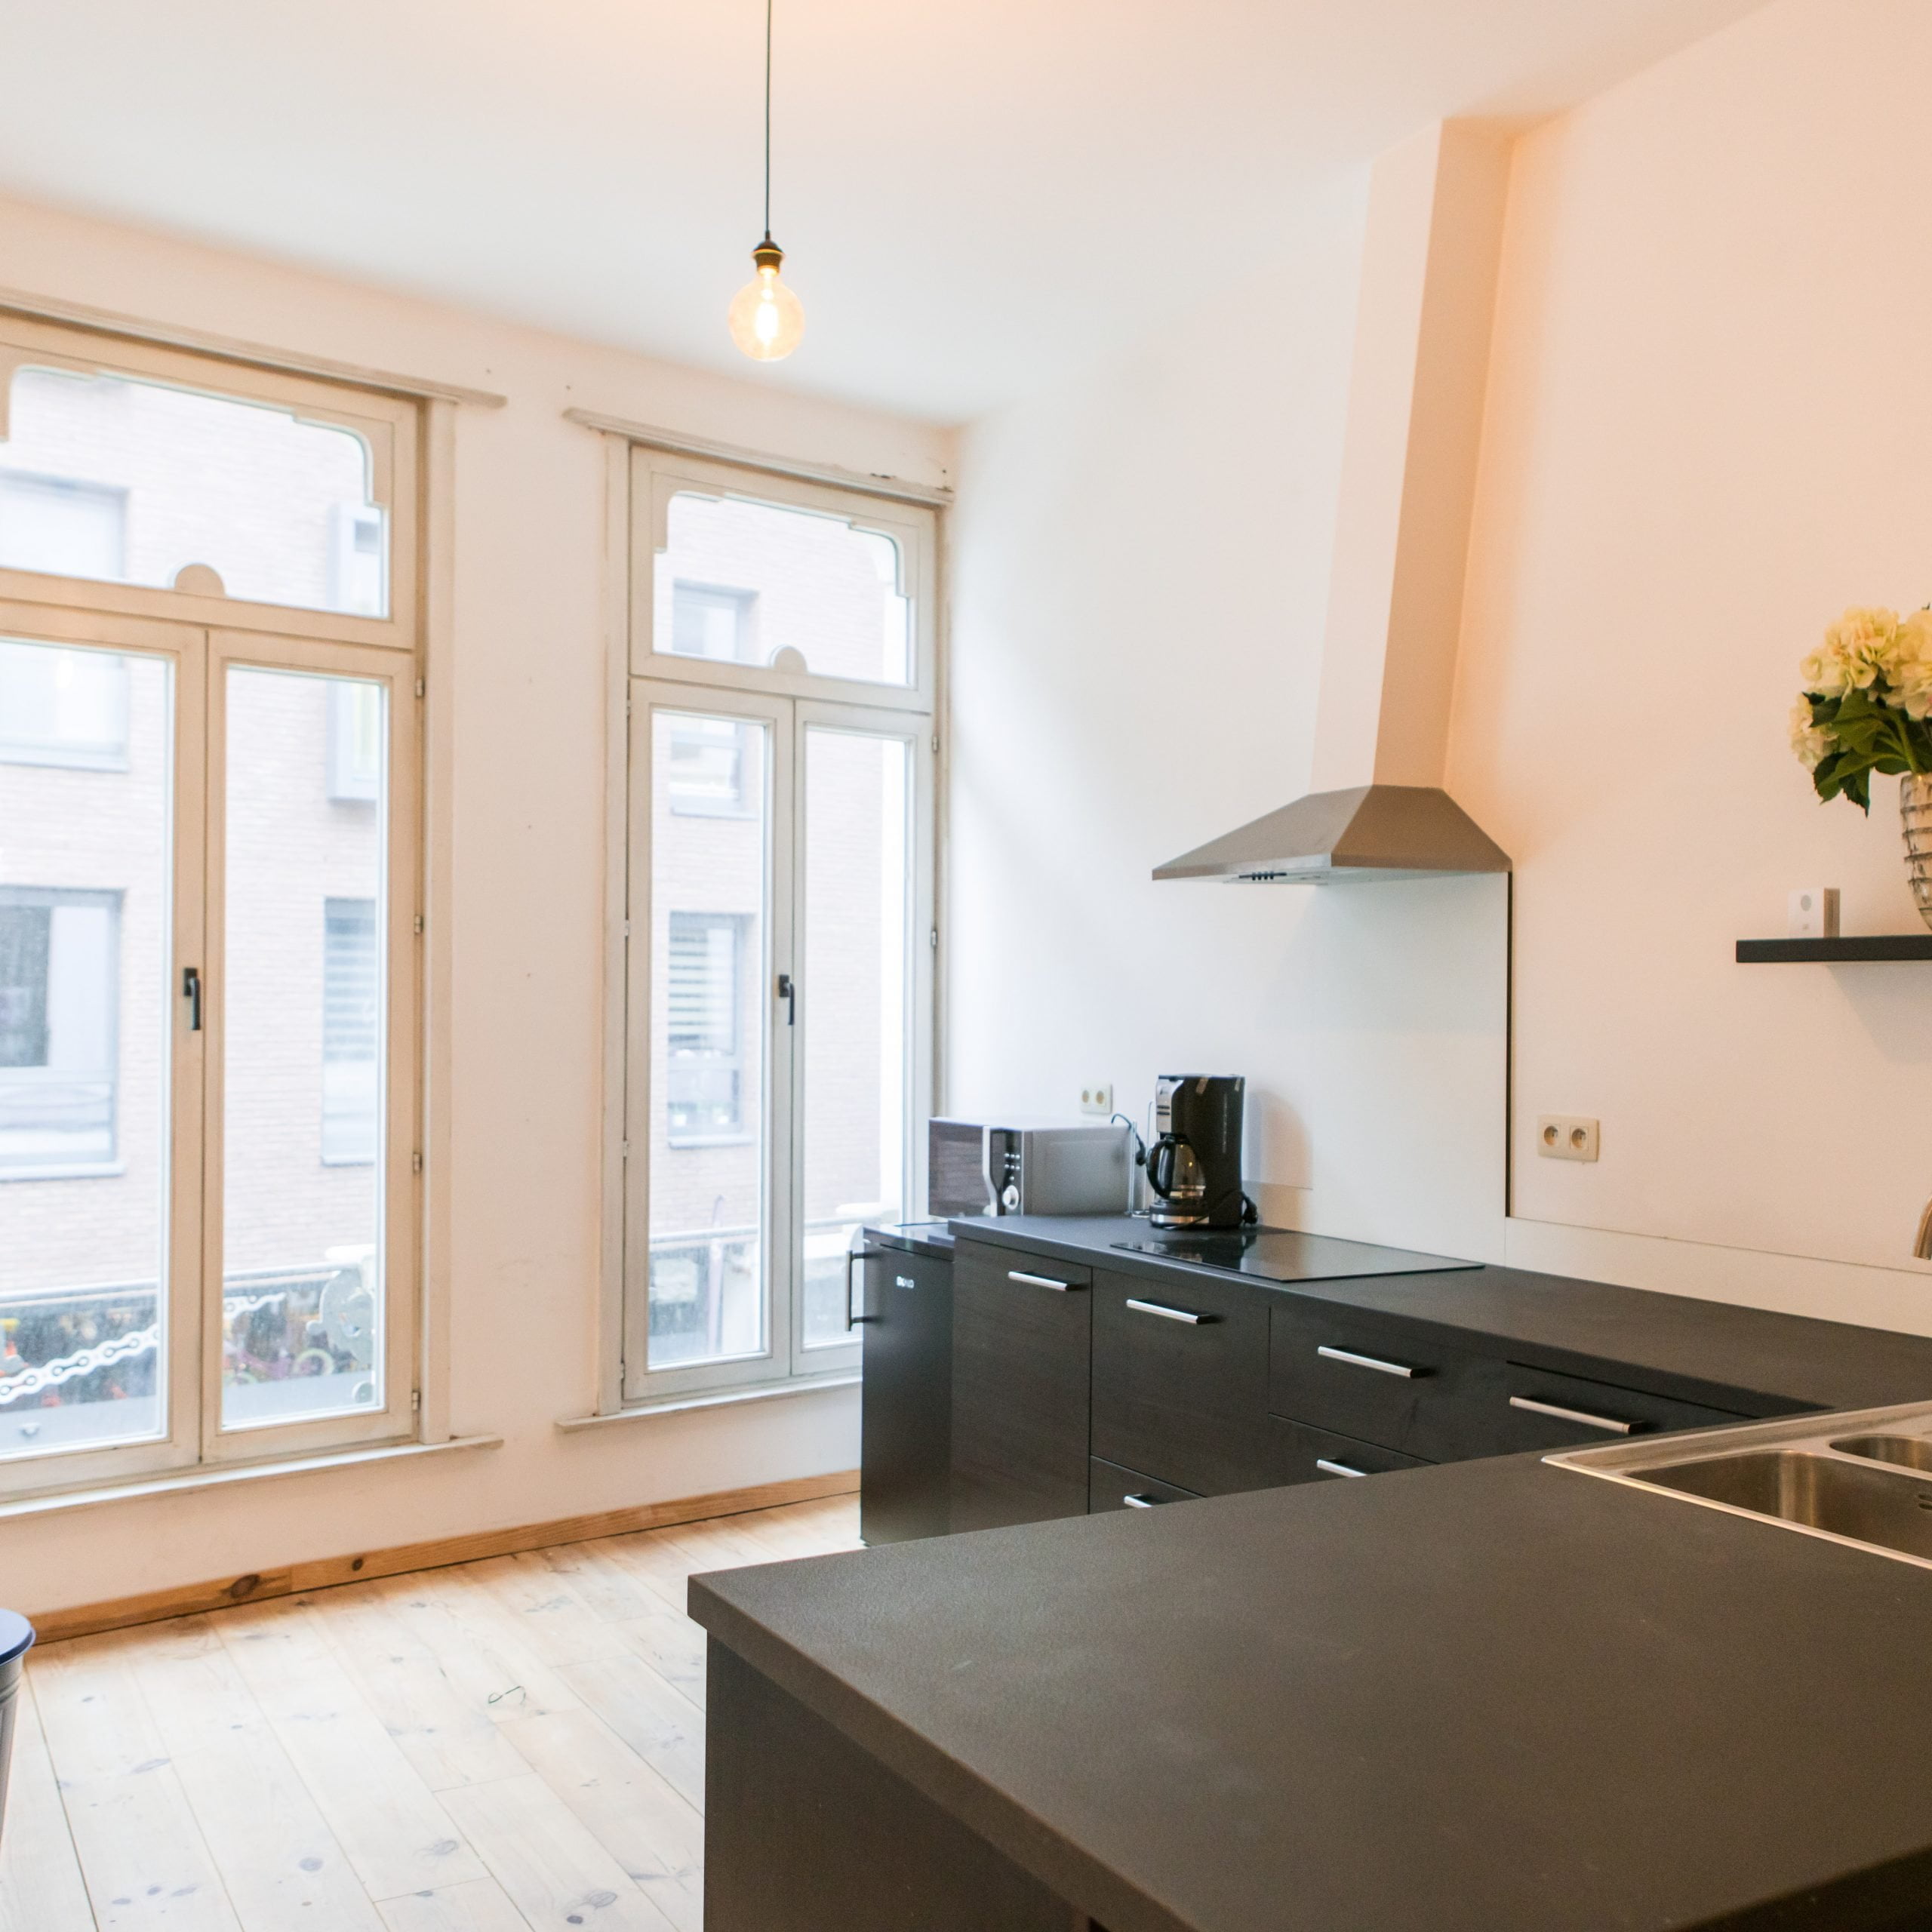 2 bedroom apartment for expats in Antwerp